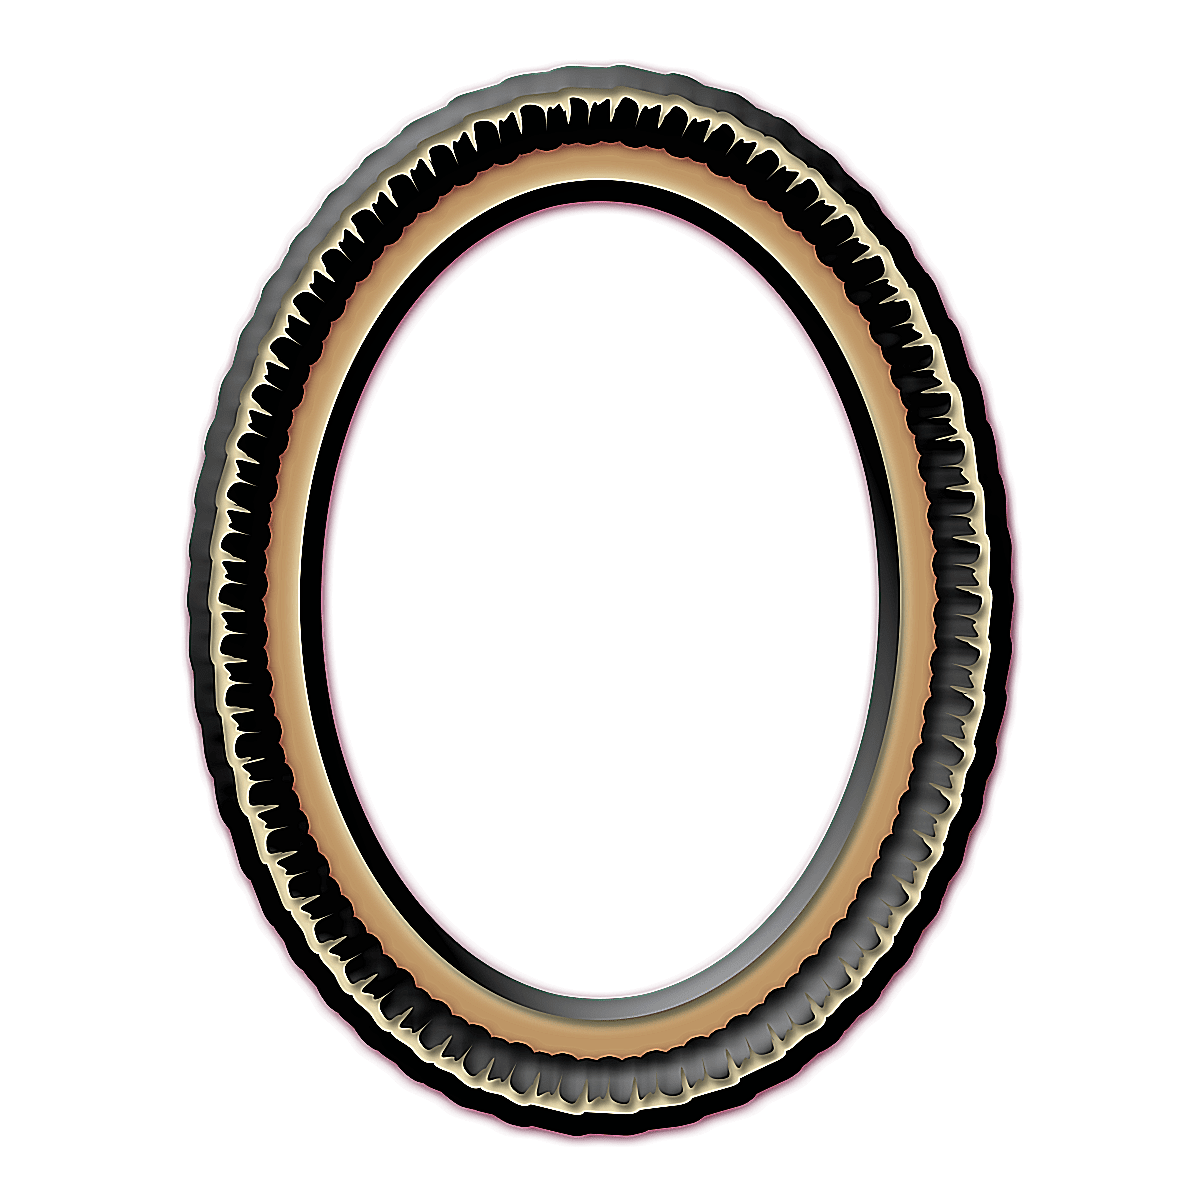 Oval picture frame png. Red curlicue layered psd